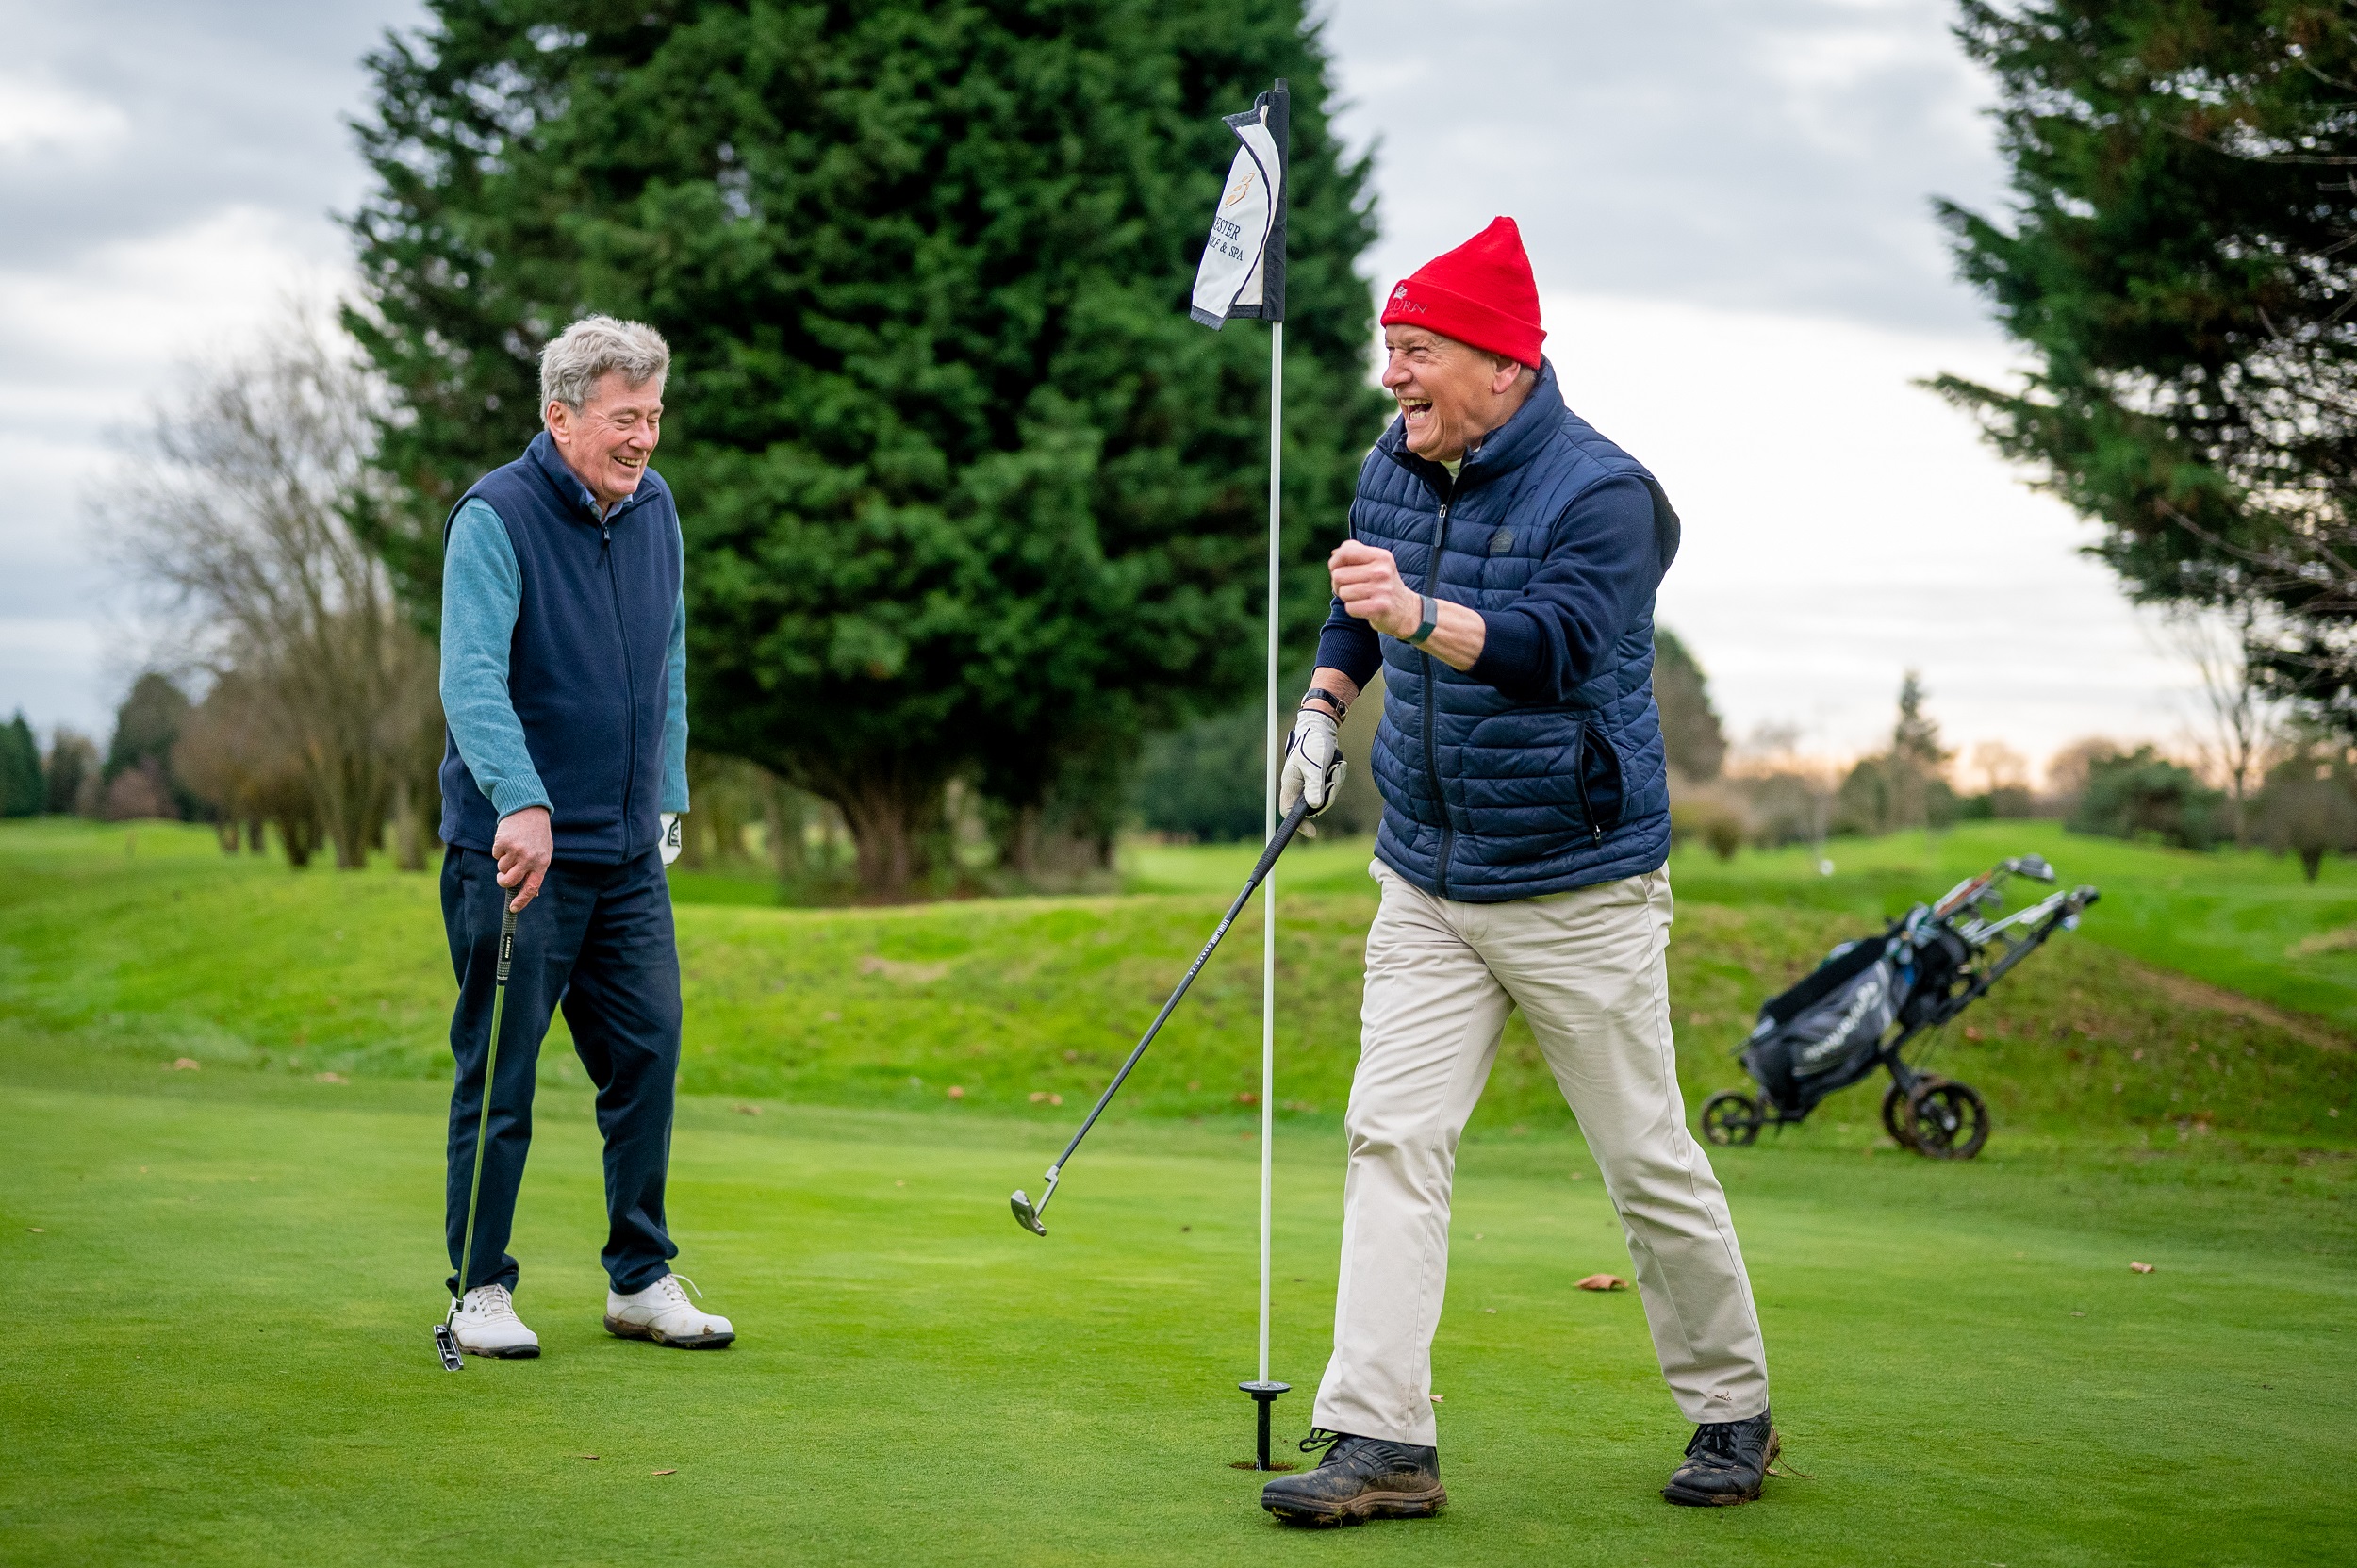 Two older men golfing and laughing